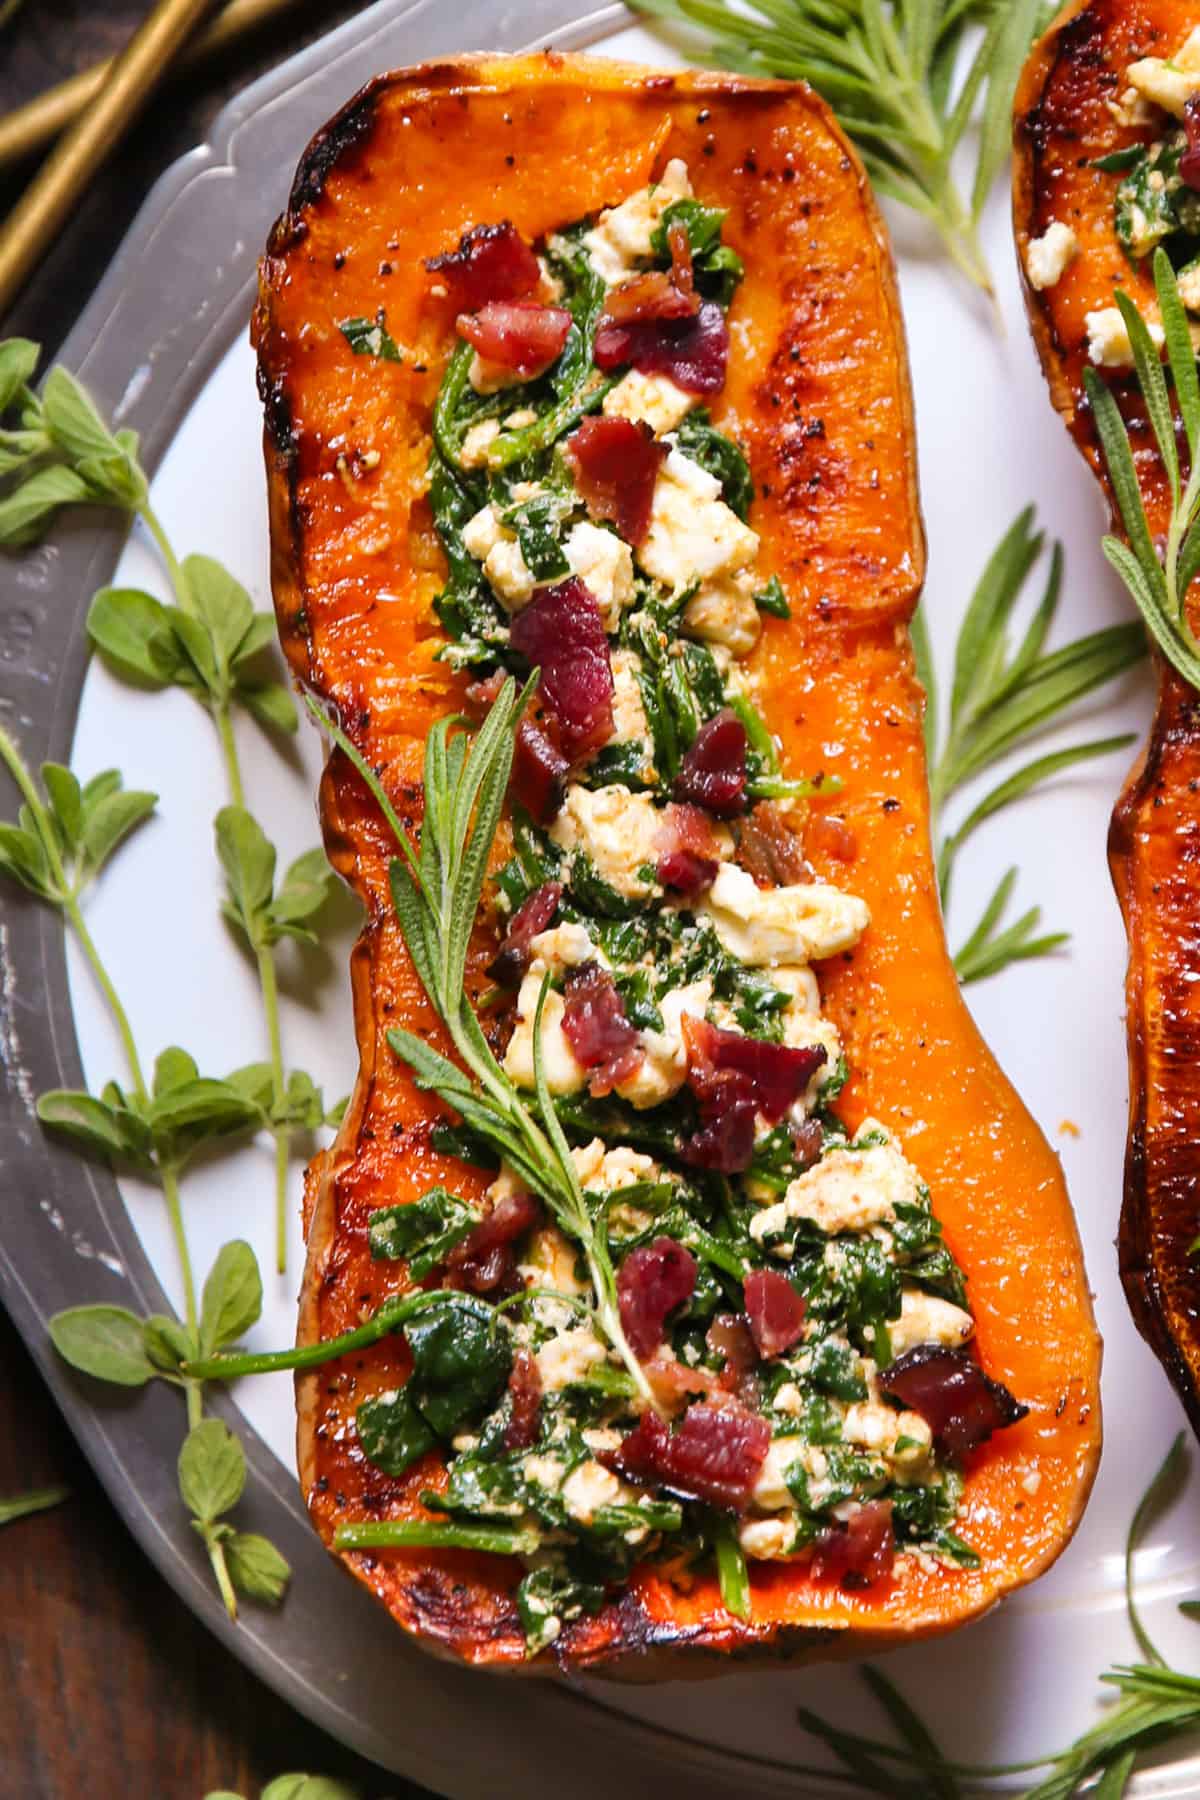 Stuffed Roasted Butternut Squash Half with Feta Cheese, Spinach, and Bacon - on a white plate.